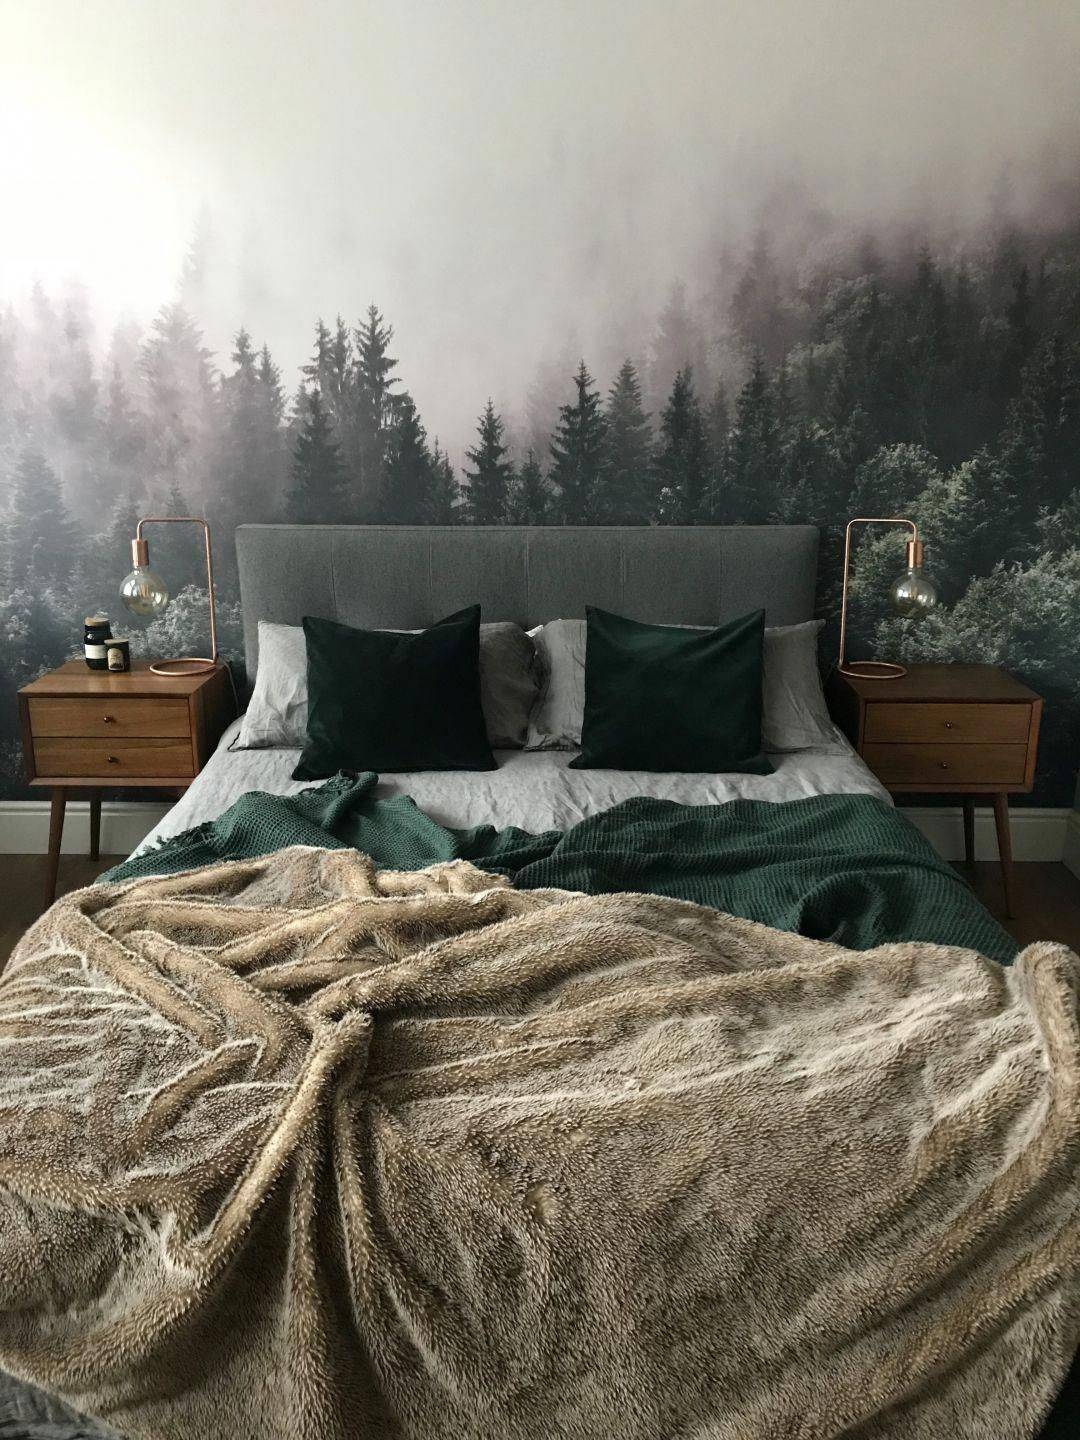 Forest wall mural for moody bedroom vibe (from Bambetle)